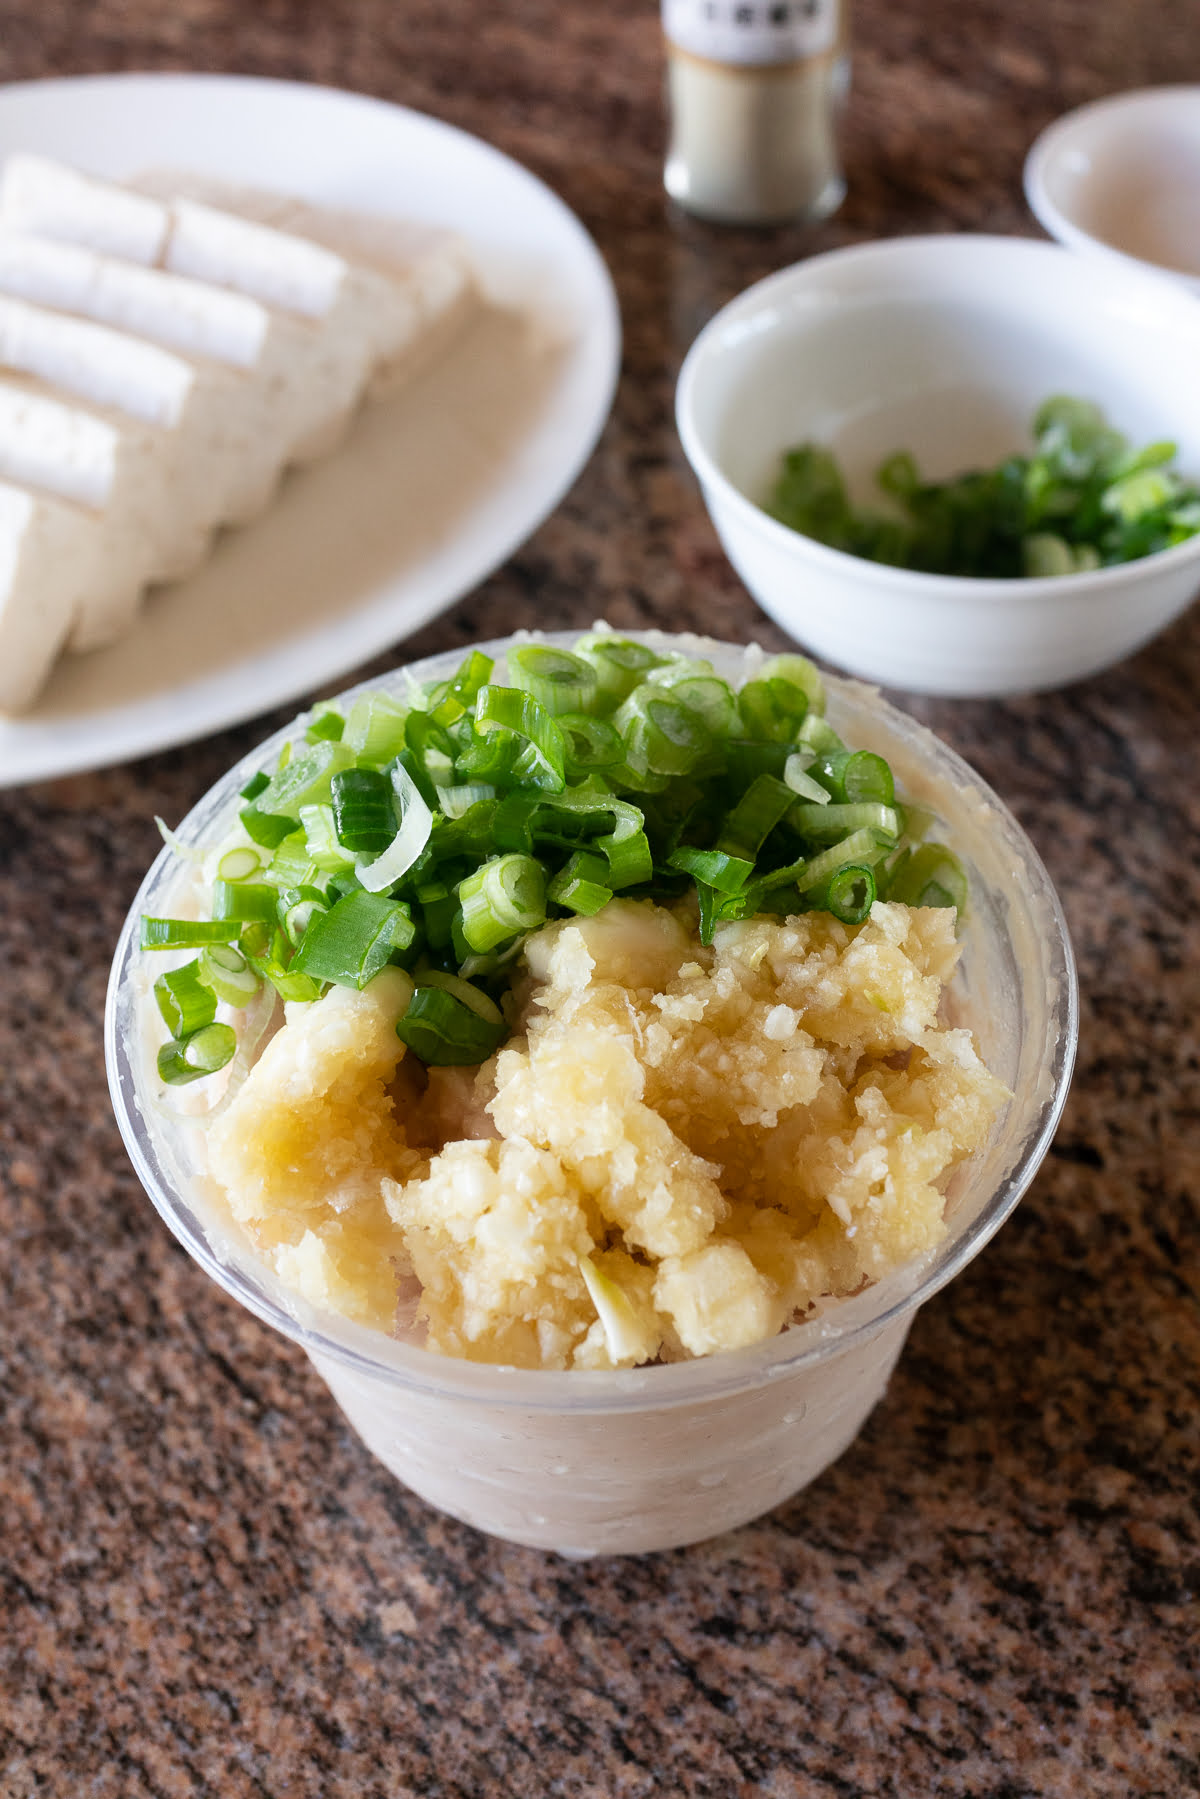 Fish paste, garlic, and green onions in a container.